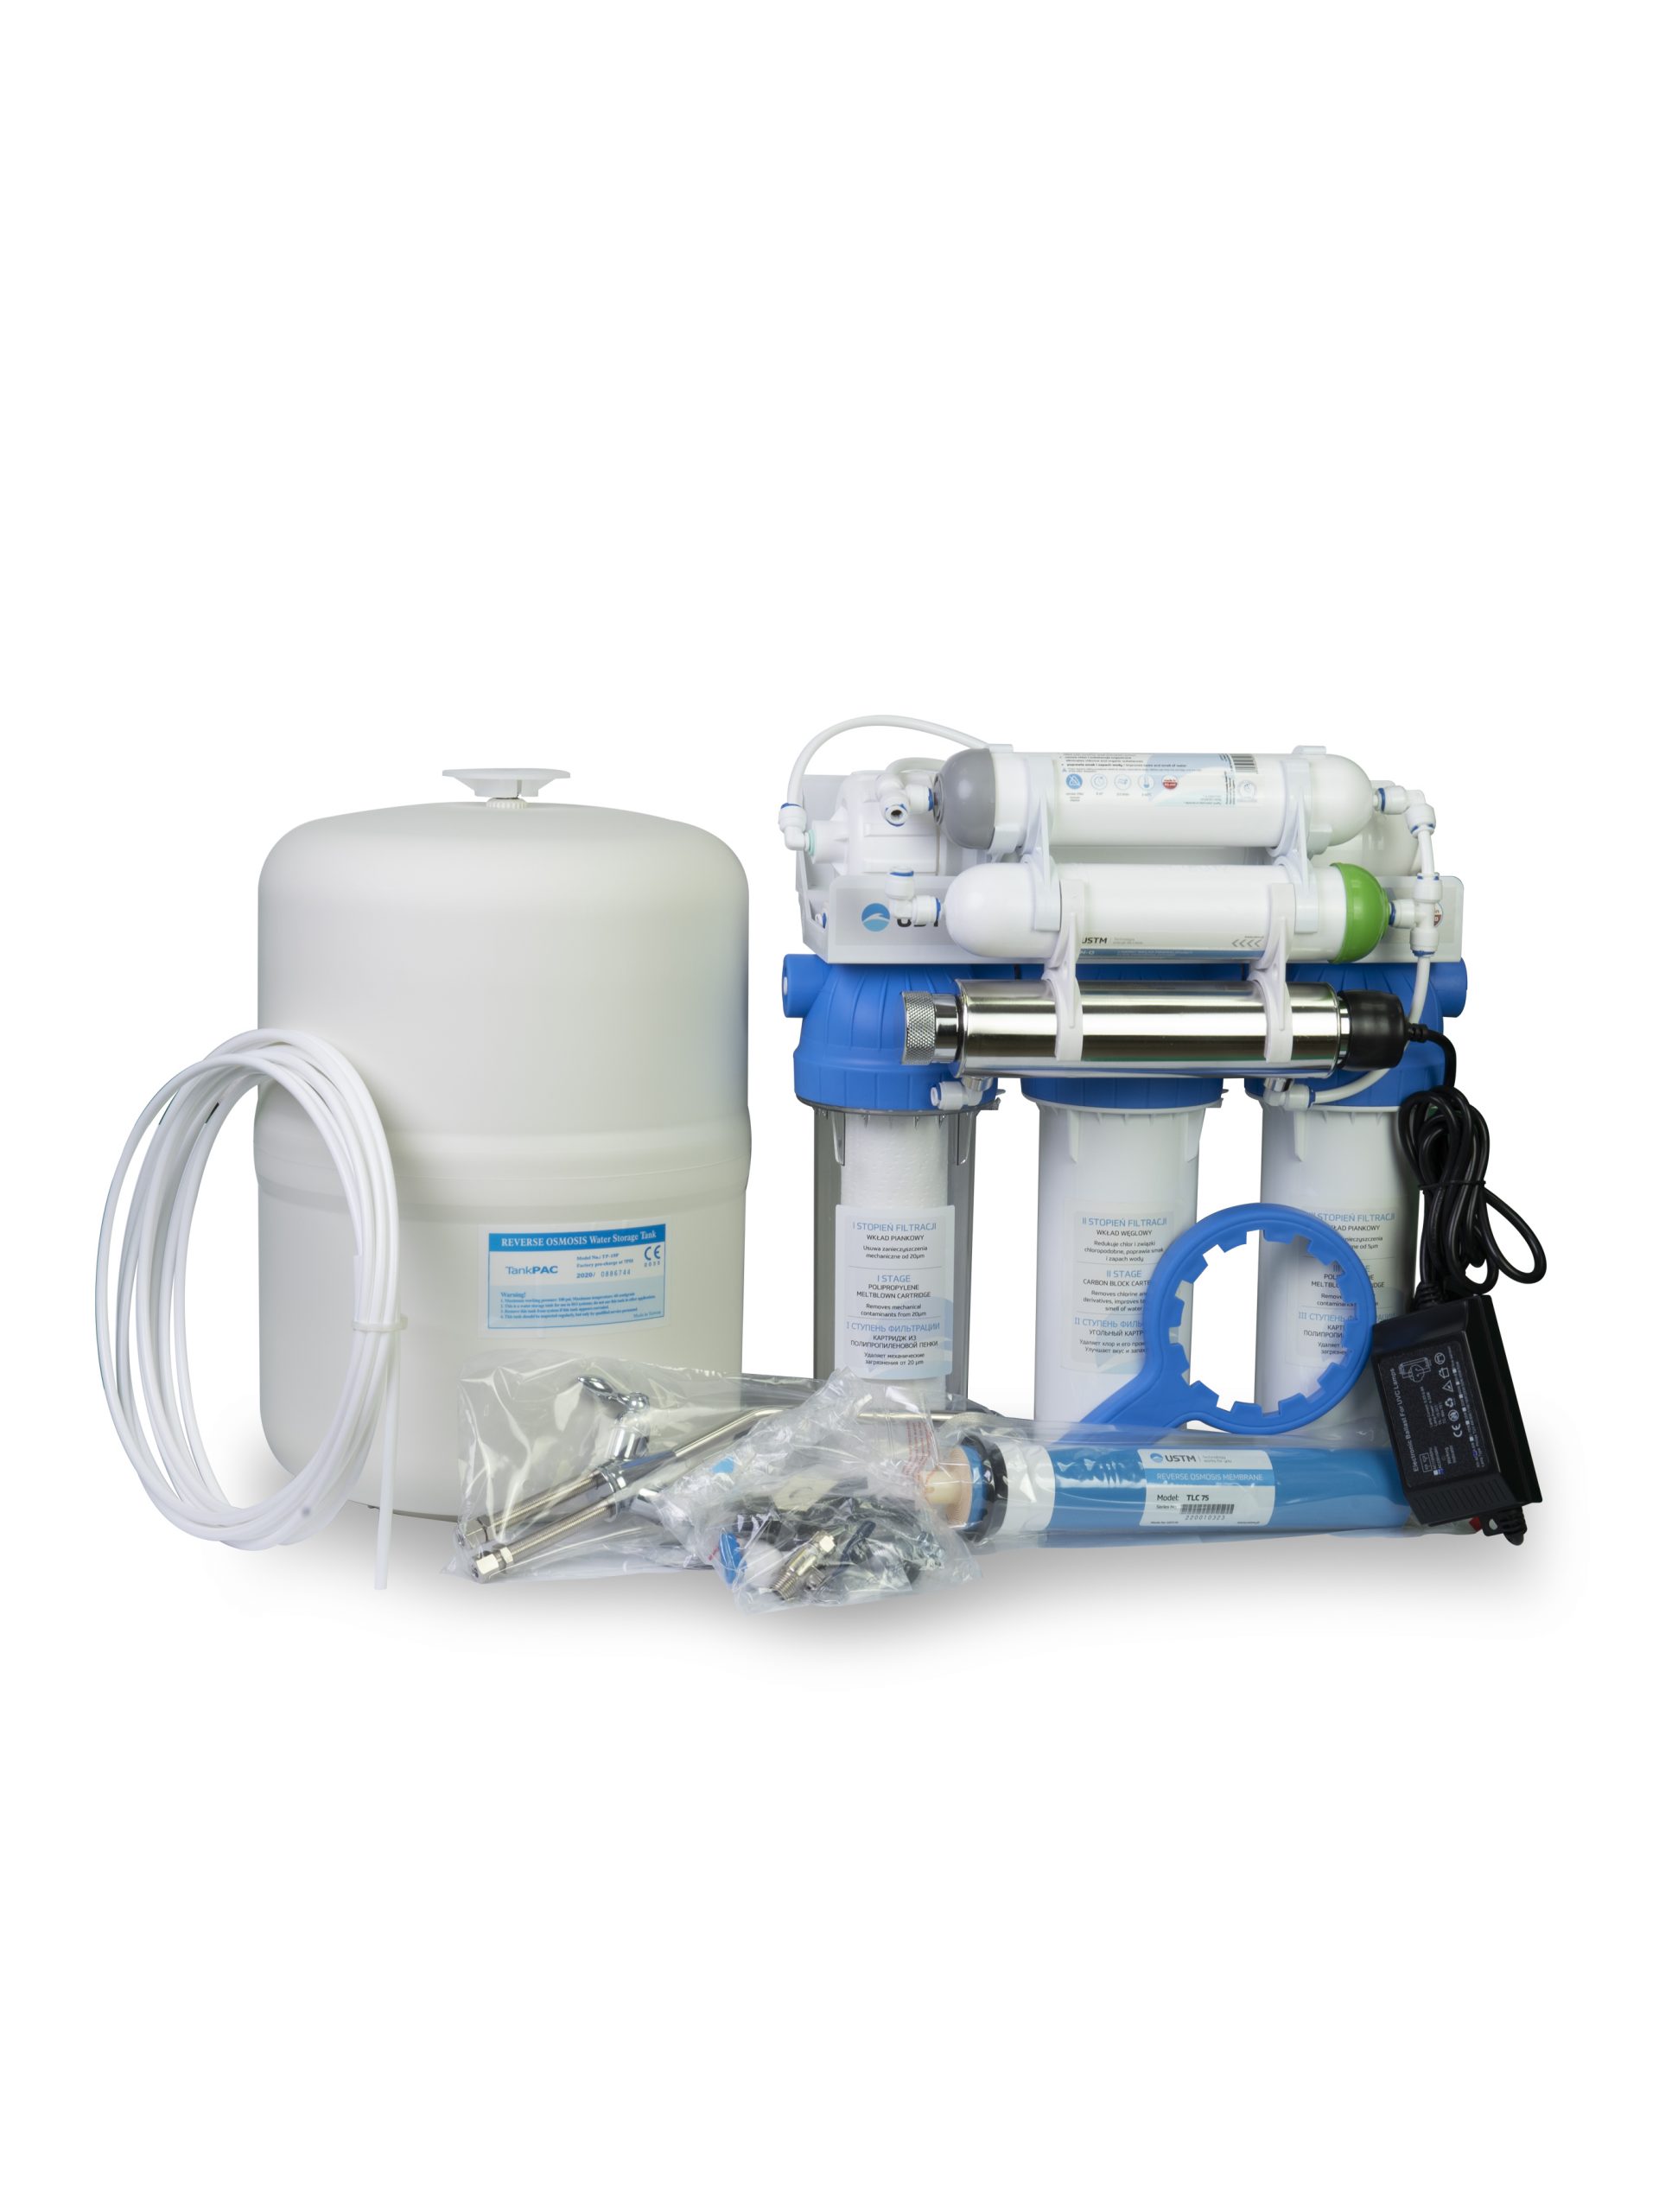 USTM 6 Stage Reverse Osmosis Filtration System, With 75GPD Stable Flow, NSF Certified RO Drinking Water Purification, With Nickel Faucet And Tank, Booster Pump, Plus Under Sink Replacement Filters from Gas Equipment Company Llc Abu Dhabi, UNITED ARAB EMIRATES